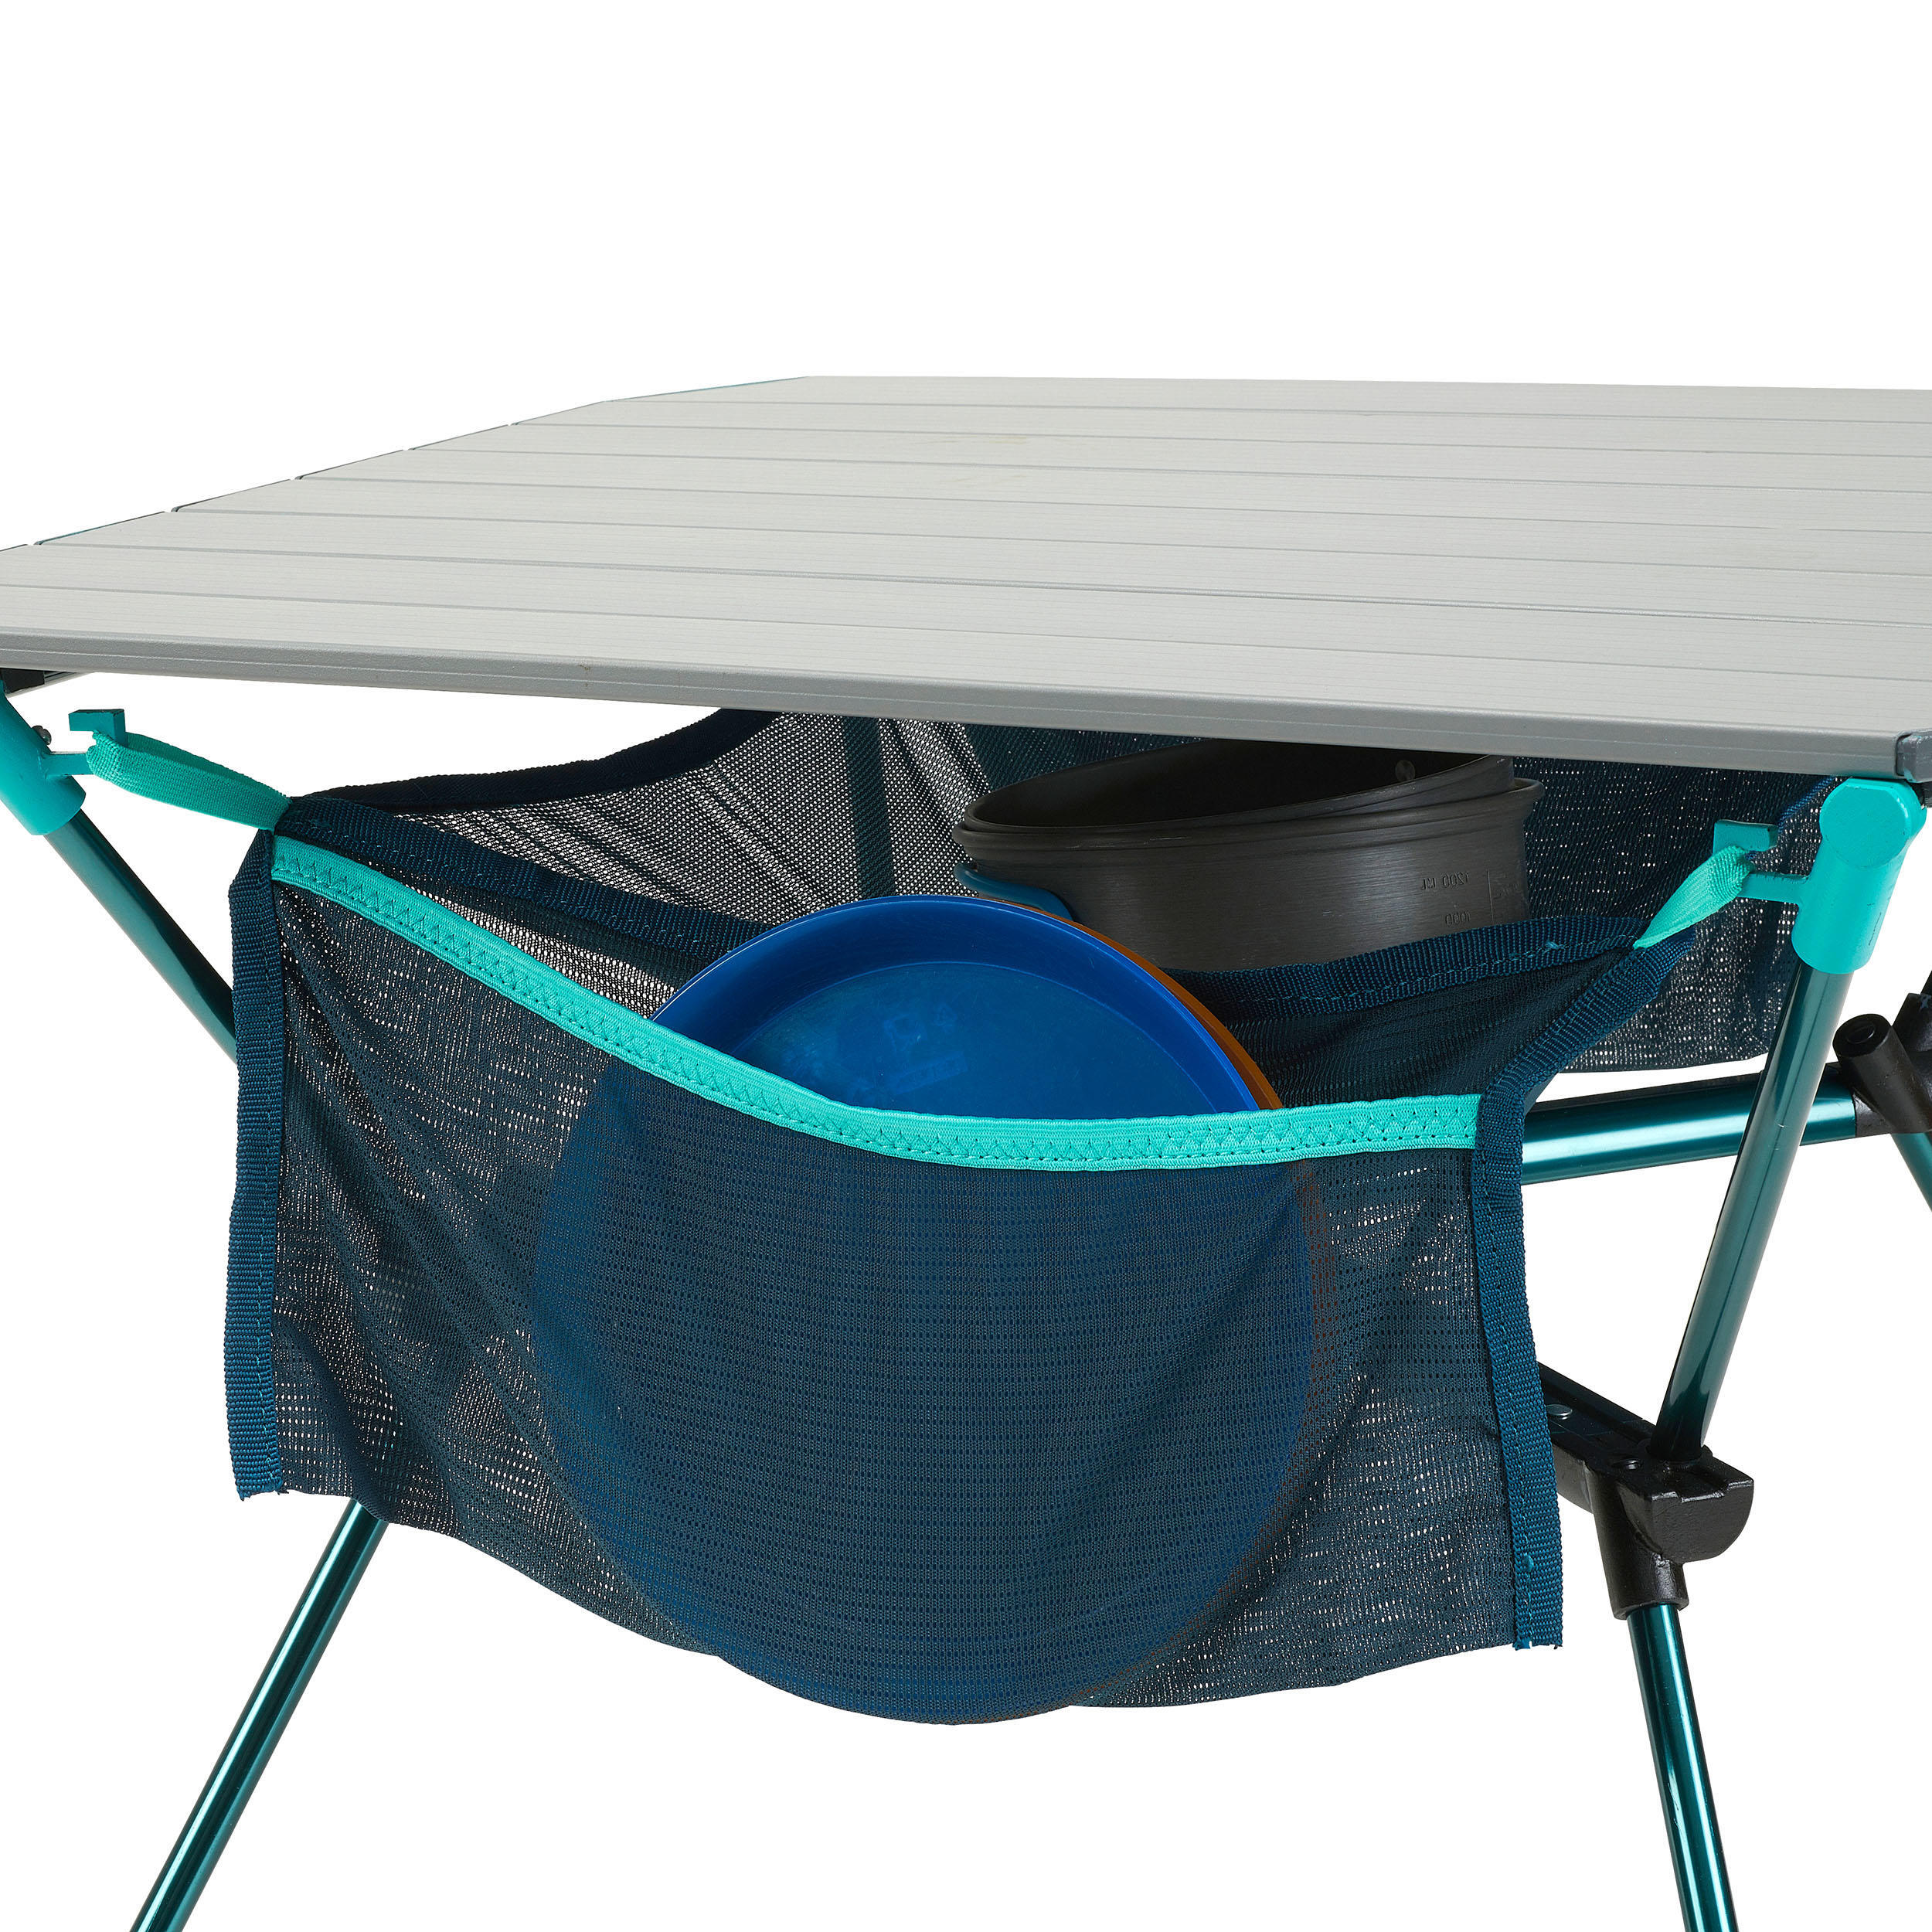 FOLDING CAMPING TABLE - MH500 8/11